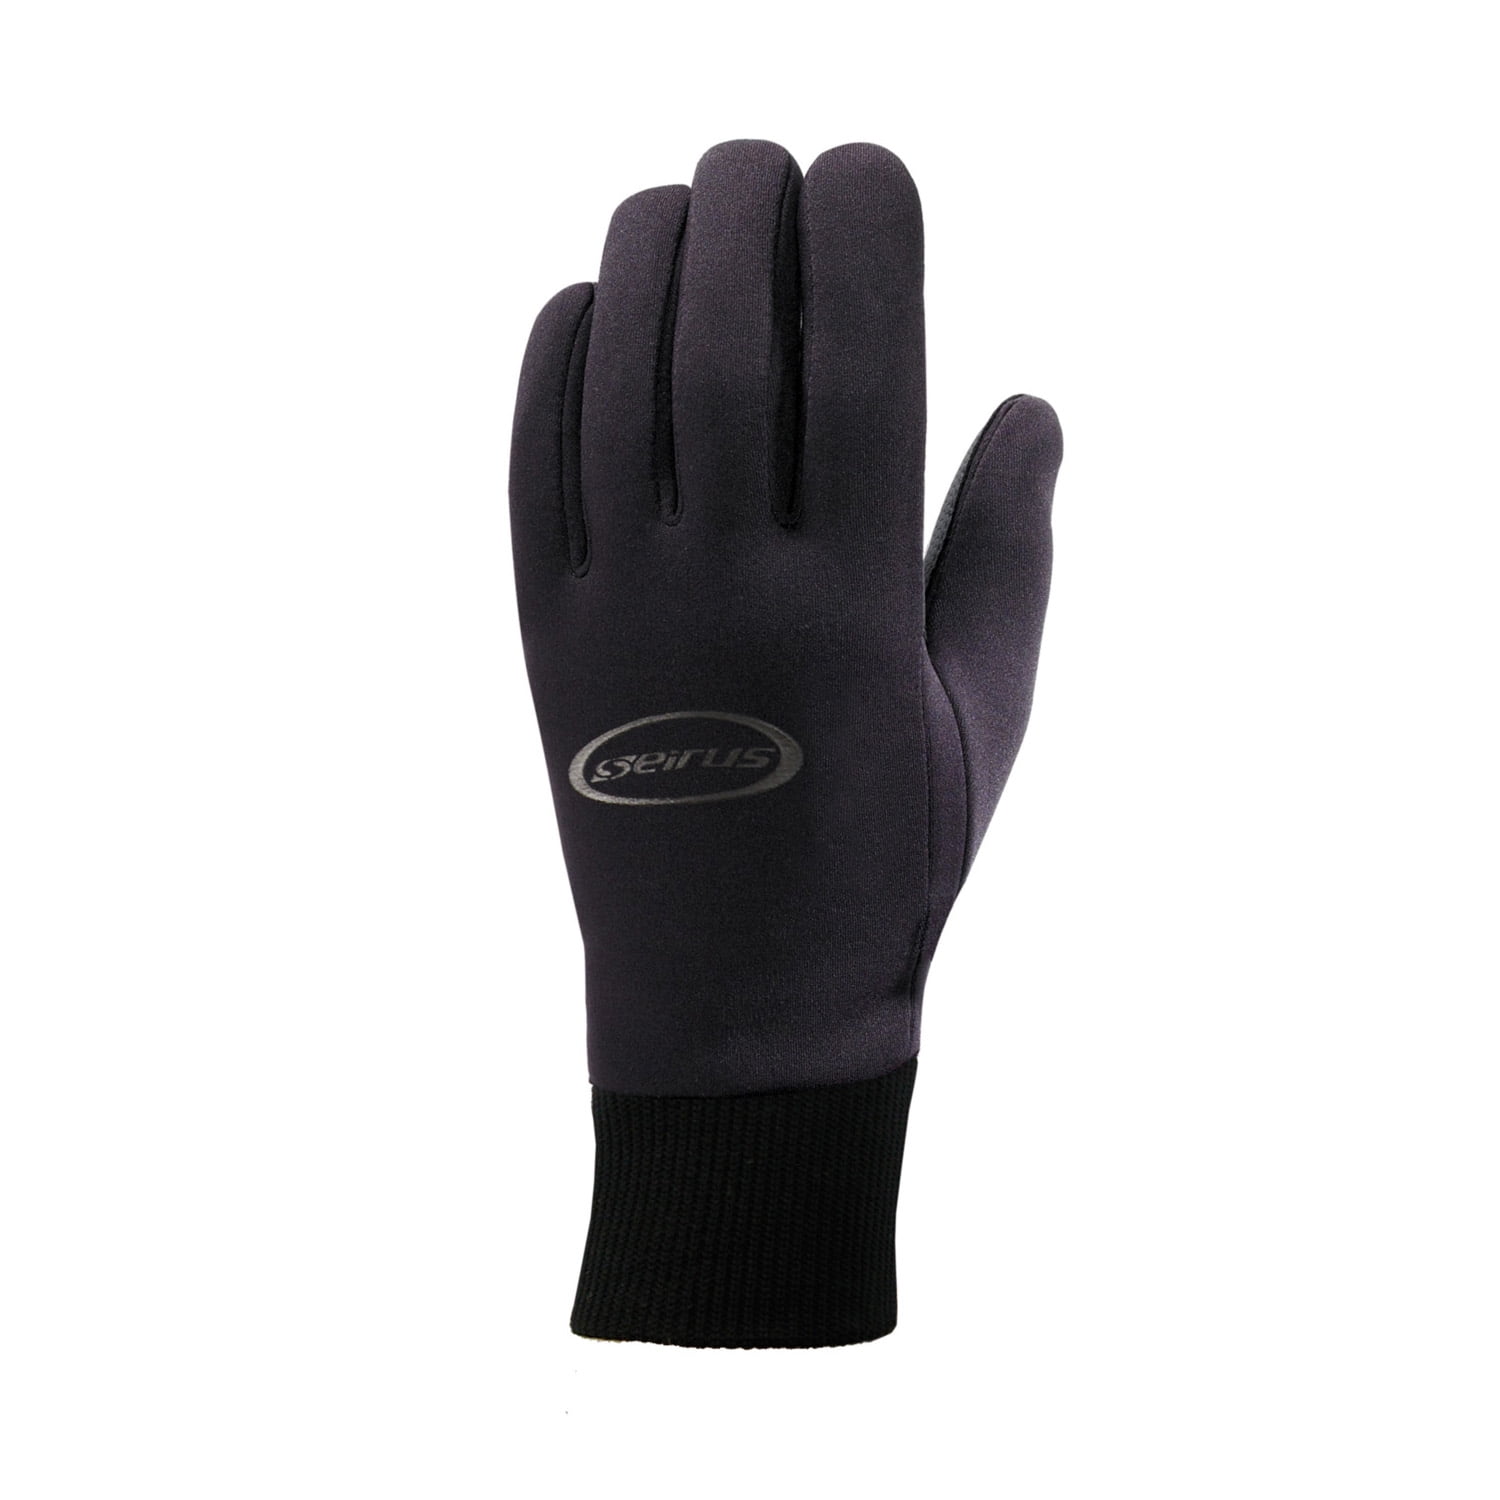 Seirus Innovation 1174 Mens Xtreme All Weather Edge Lightweight Polartec Form Fit Waterproof Leather Glove with Soundtouch Touch Screen Technology